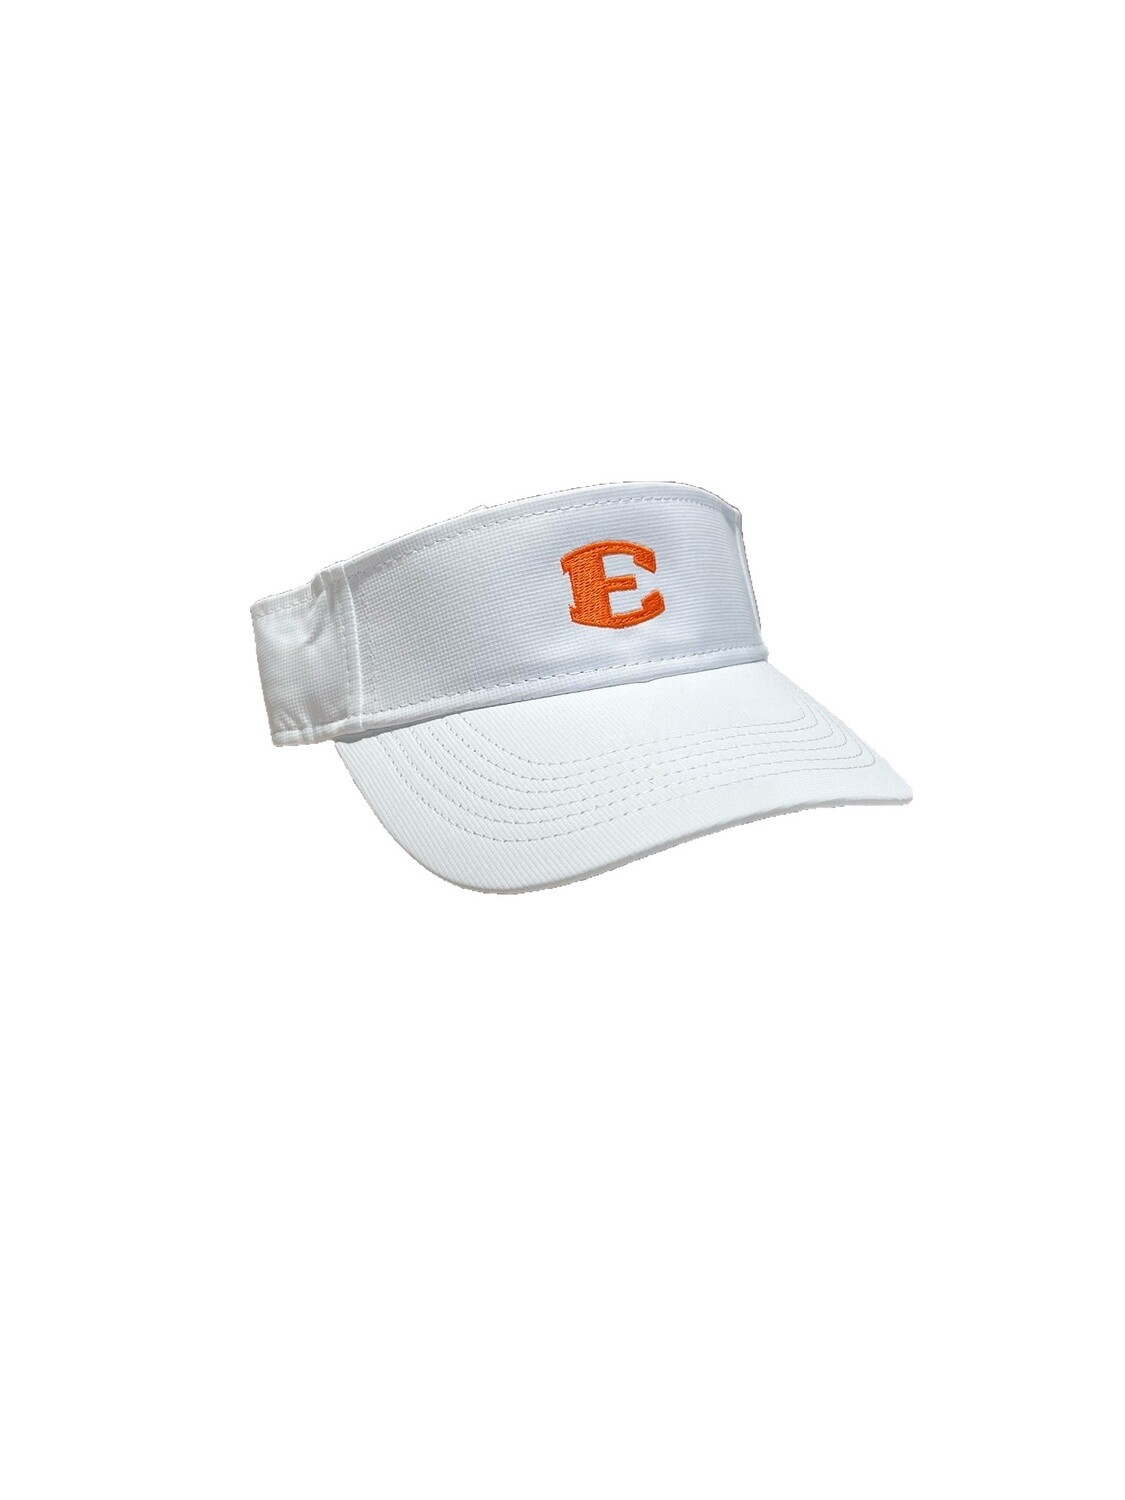 Imperial Adult Performance Visor, Color: White